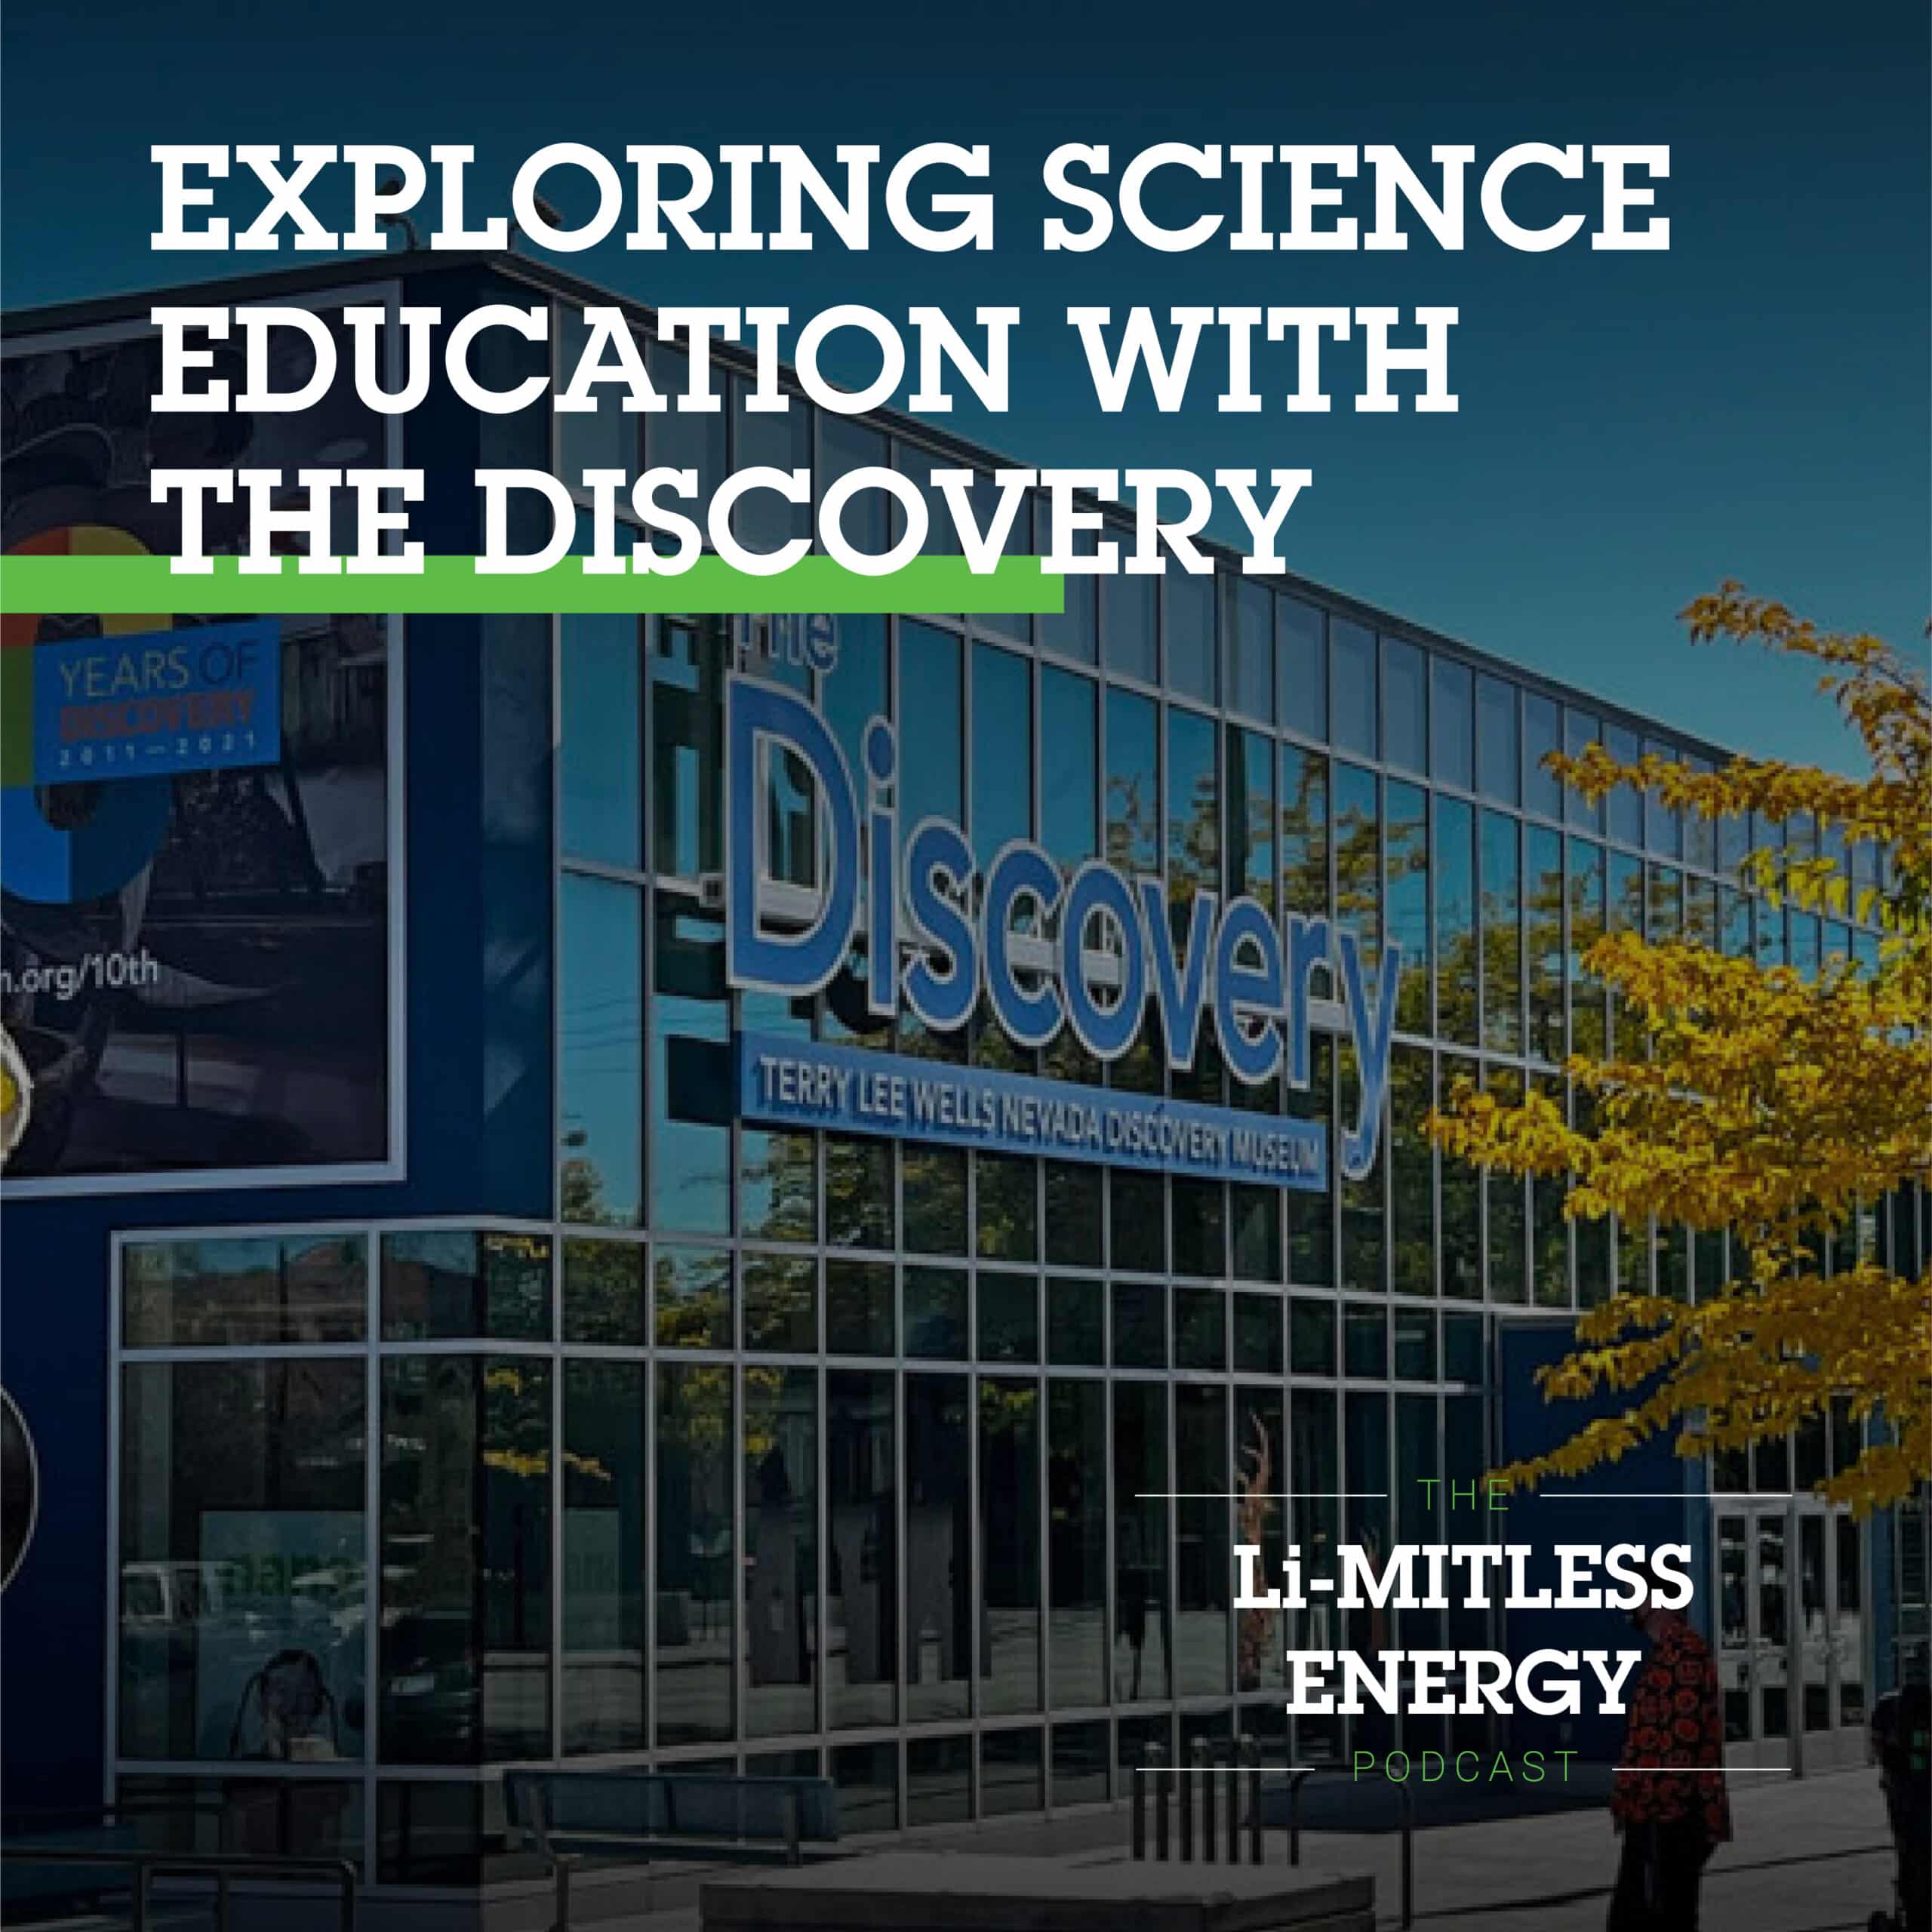 The Li-MITLESS ENERGY Podcast: Exploring Science Education with The Discovery